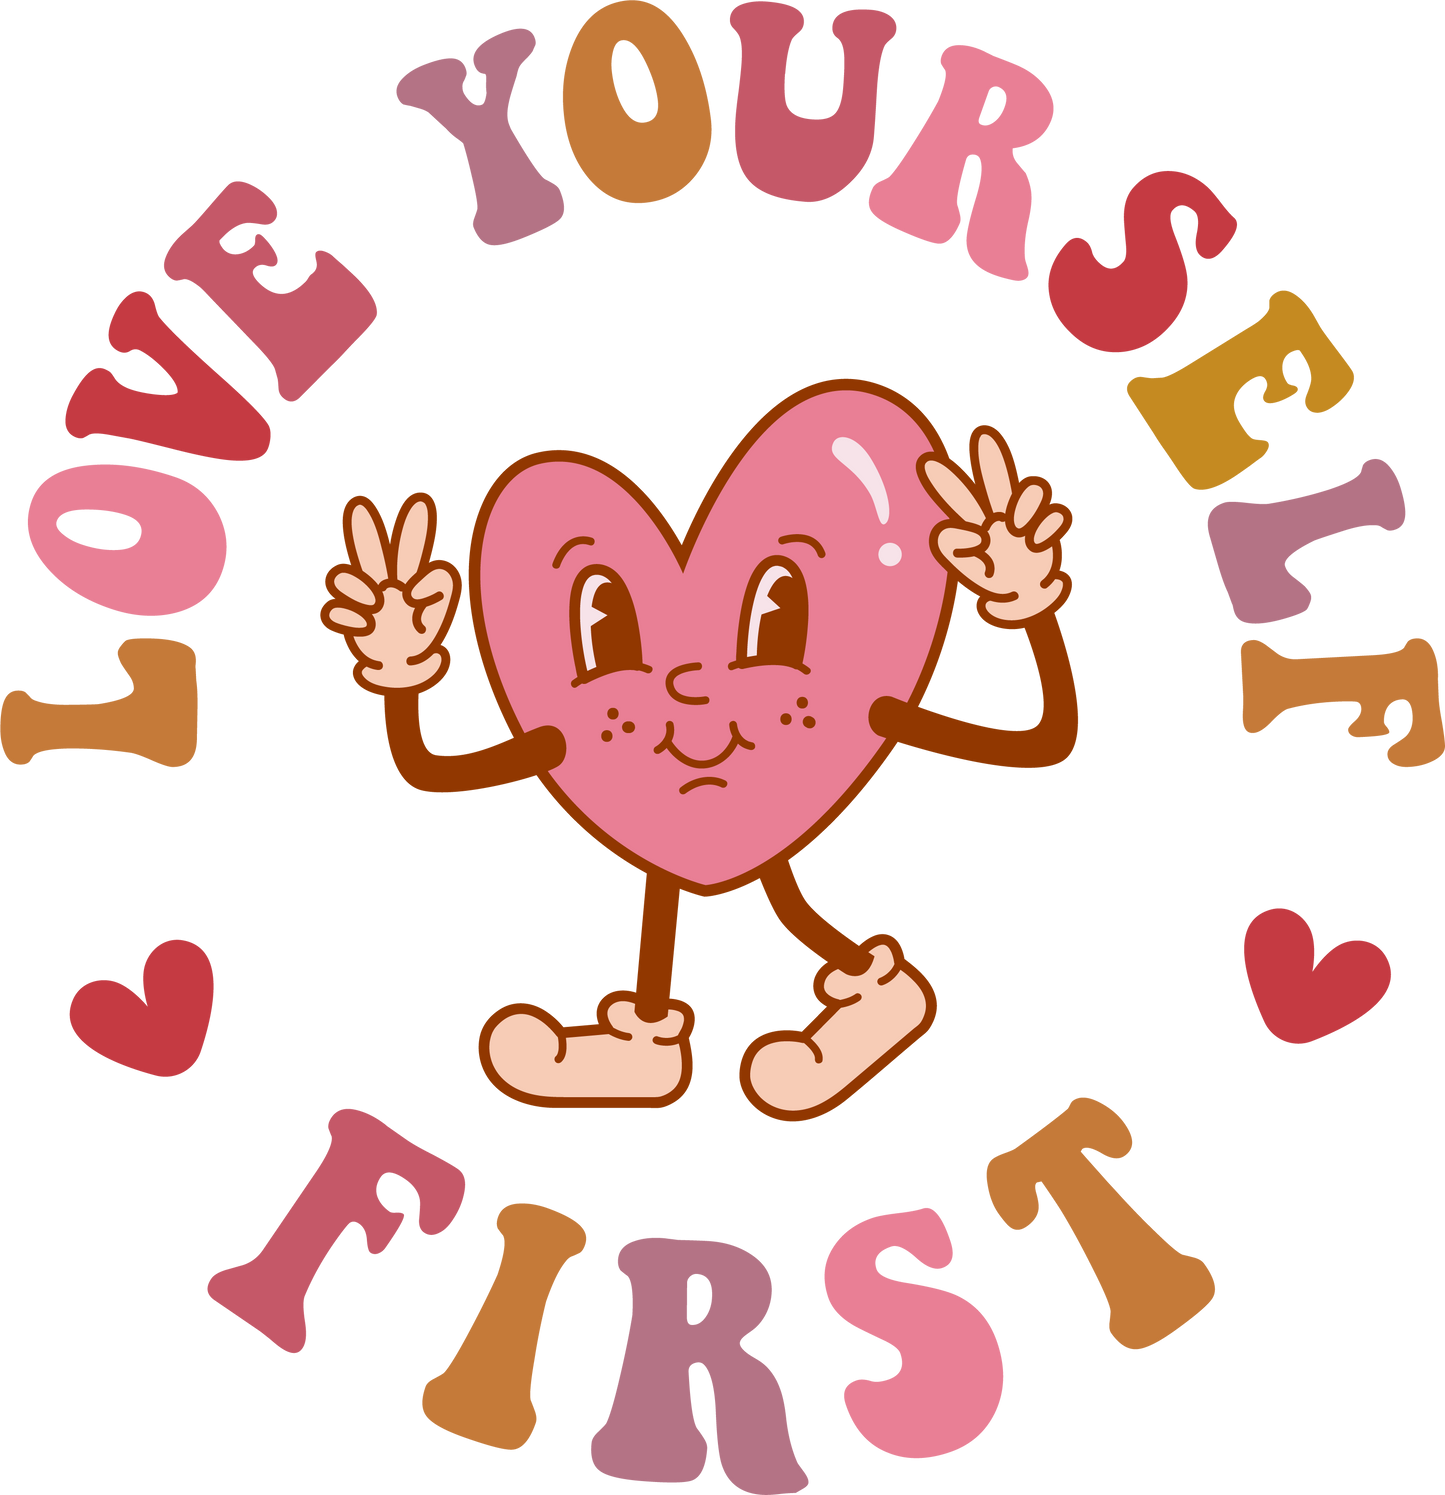 VALENTINE'S DAY PRINT 184 - LOVE YOURSELF FIRST